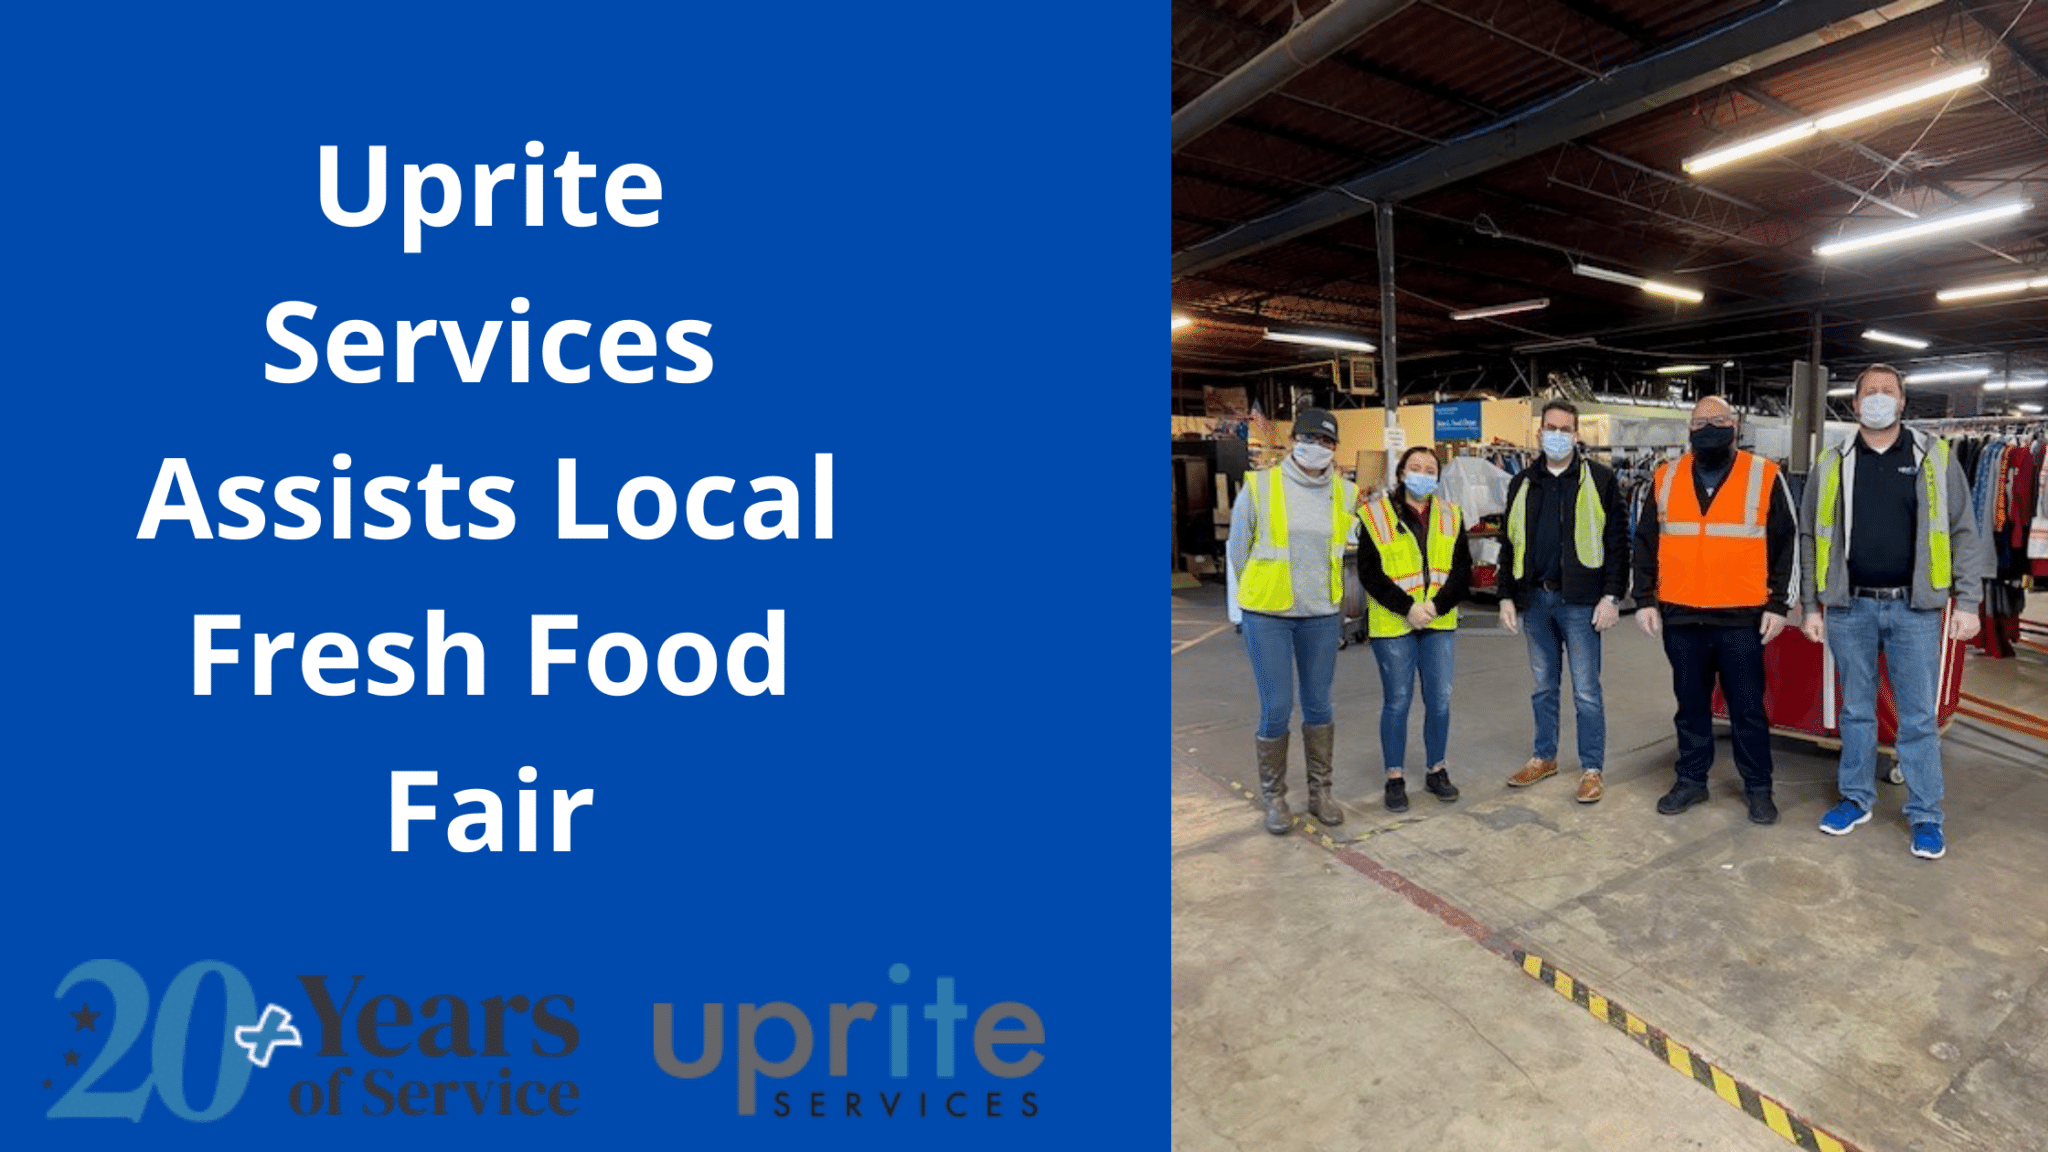 Uprite Services Assists Local Fresh Food Fair